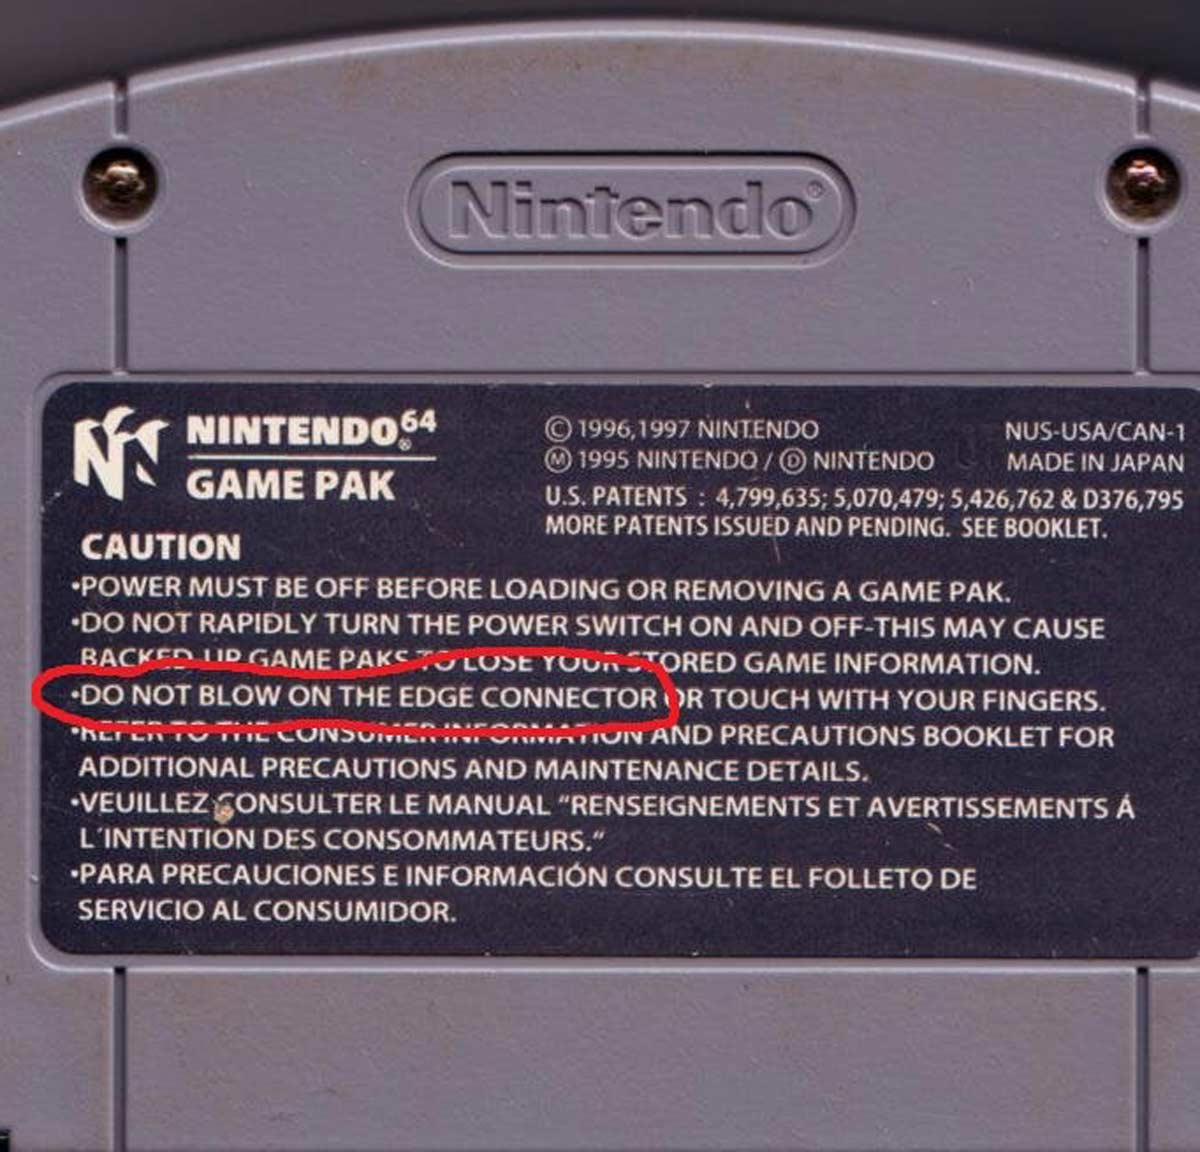 The most ignored warning in gaming history